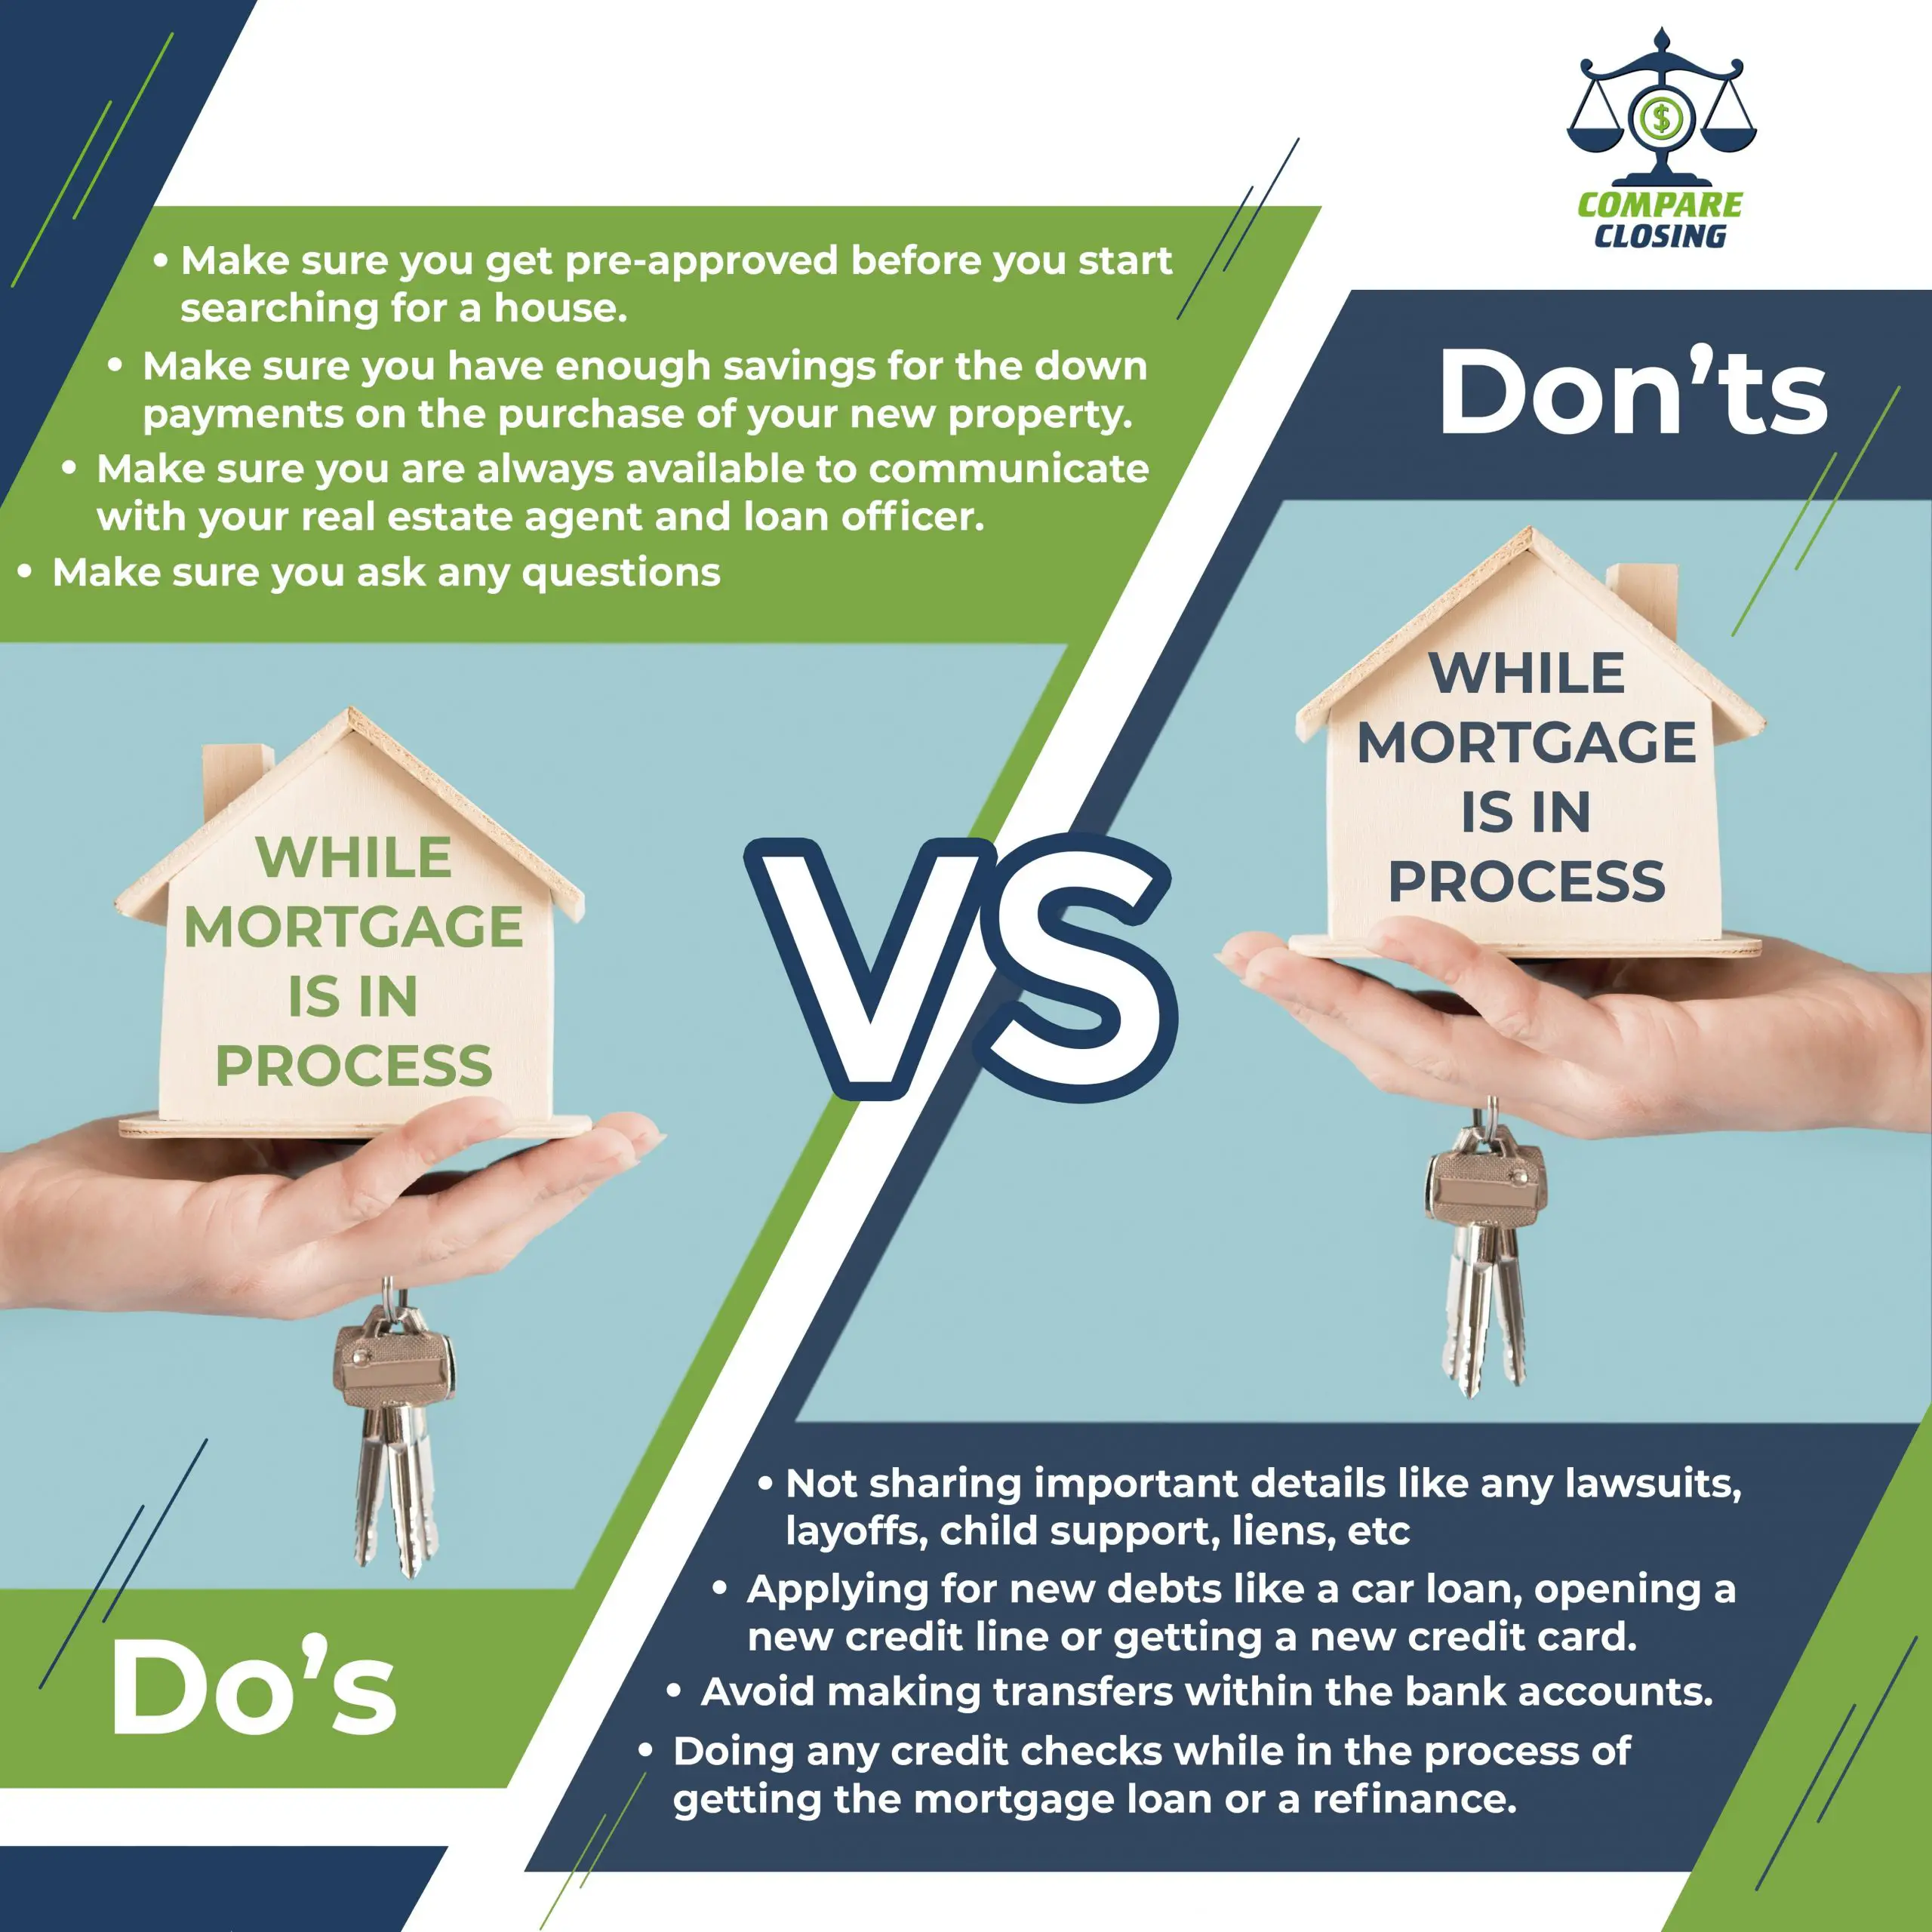 Here are some of the Dos and Donts while your mortgage is in process ...